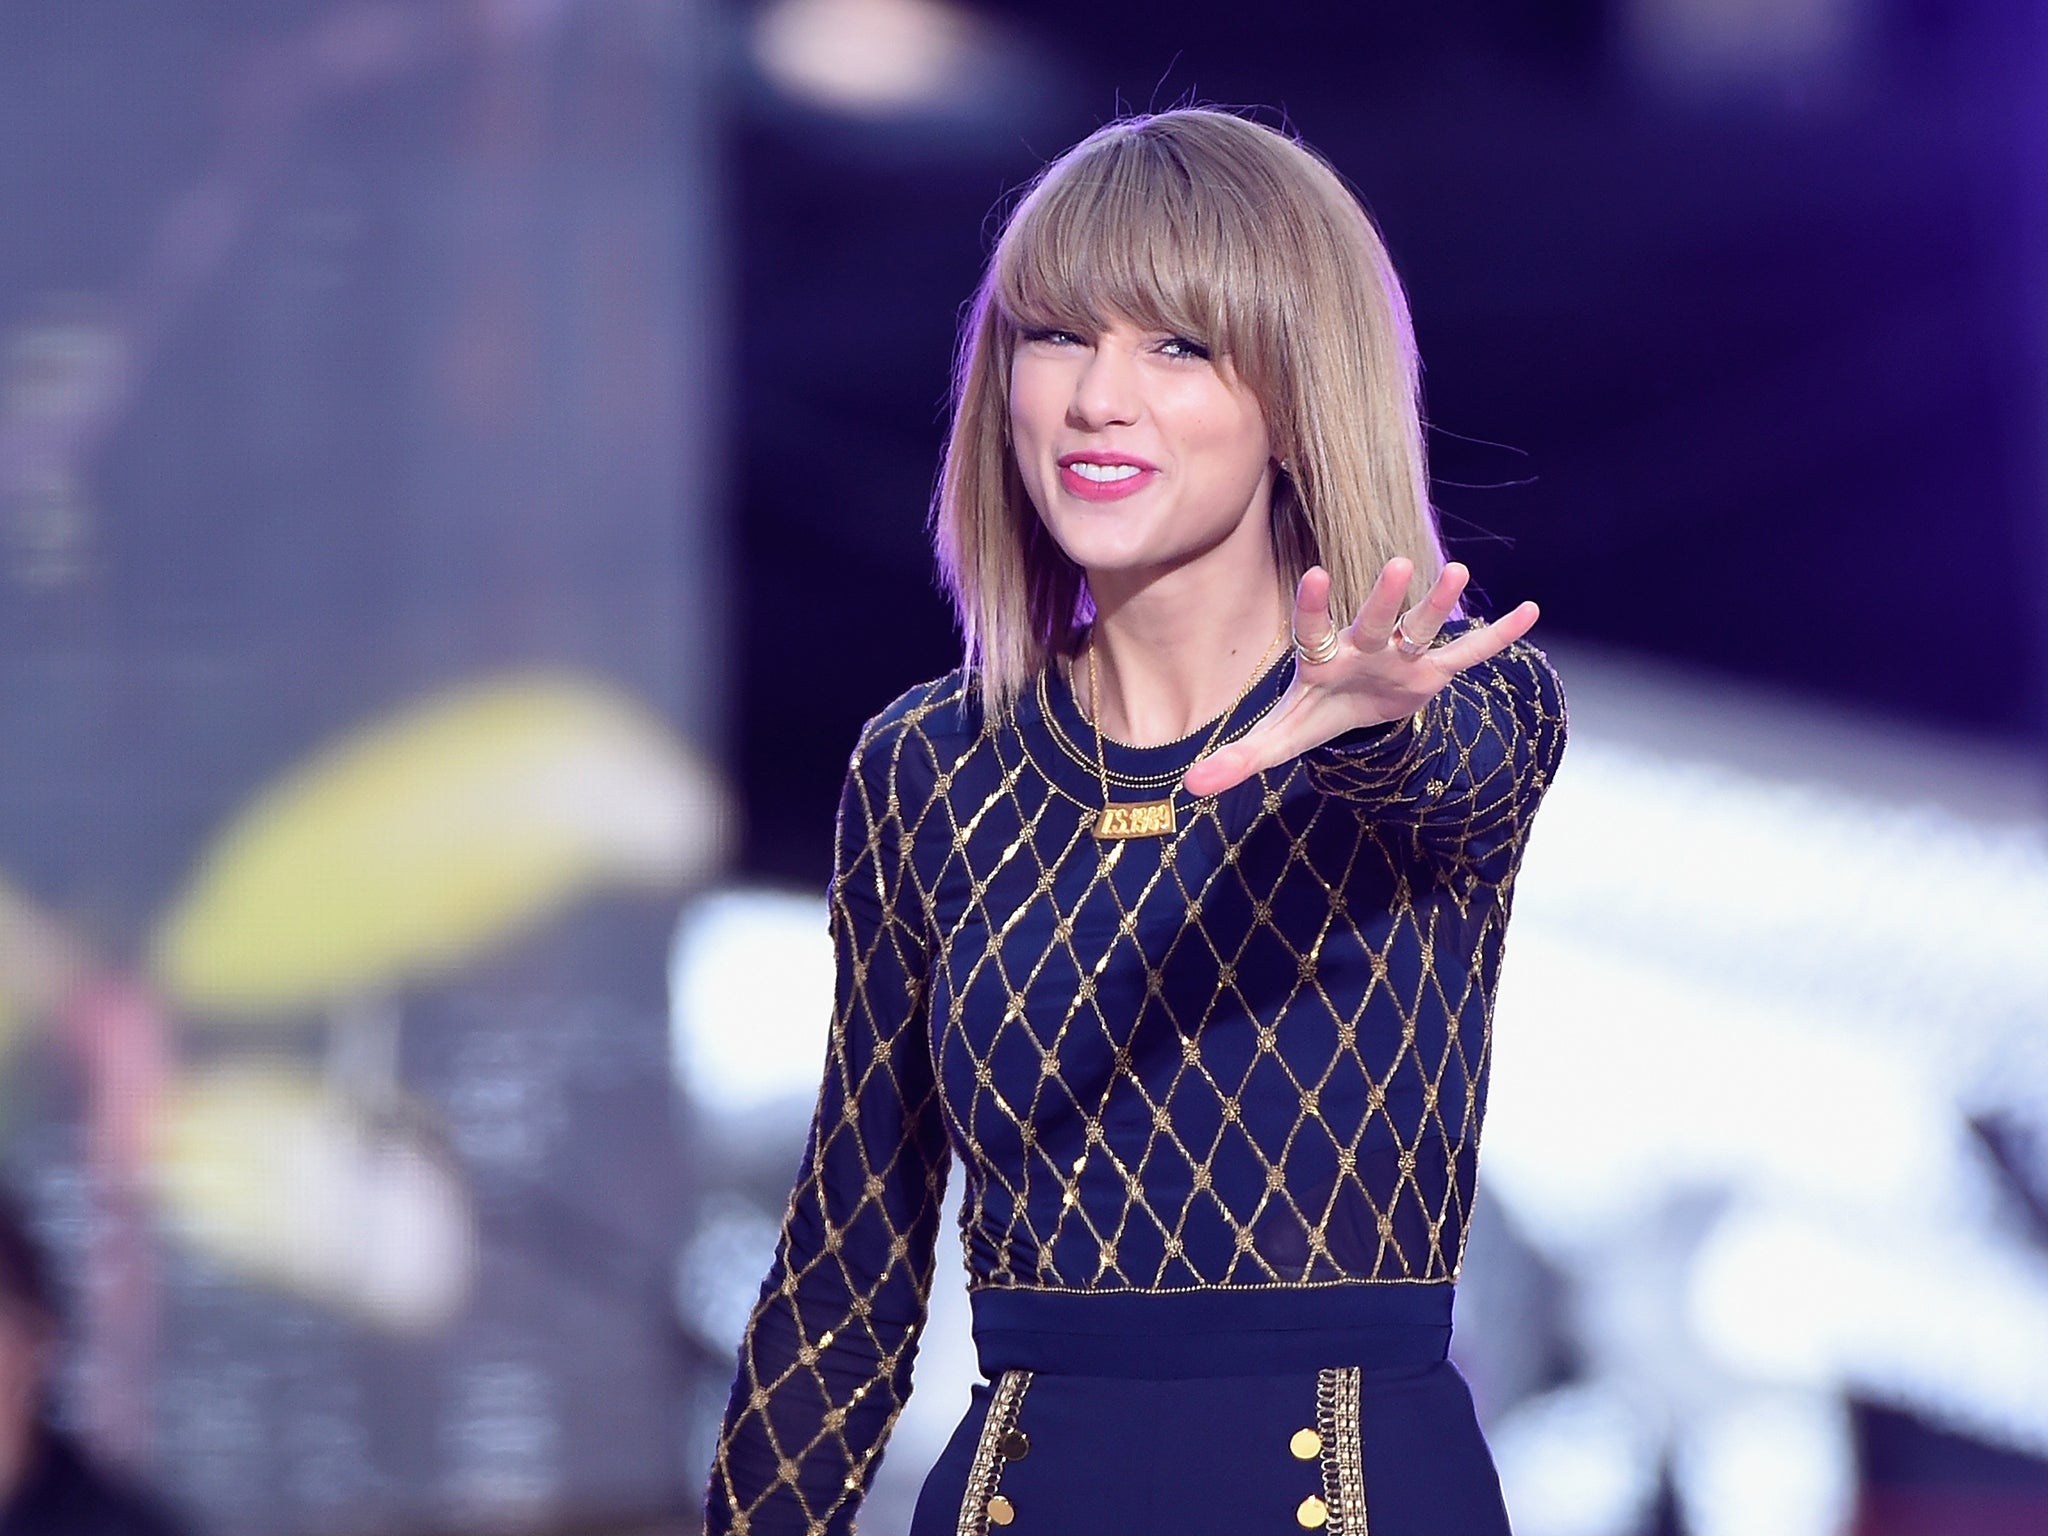 Taylor Swift has spent years in the spotlight